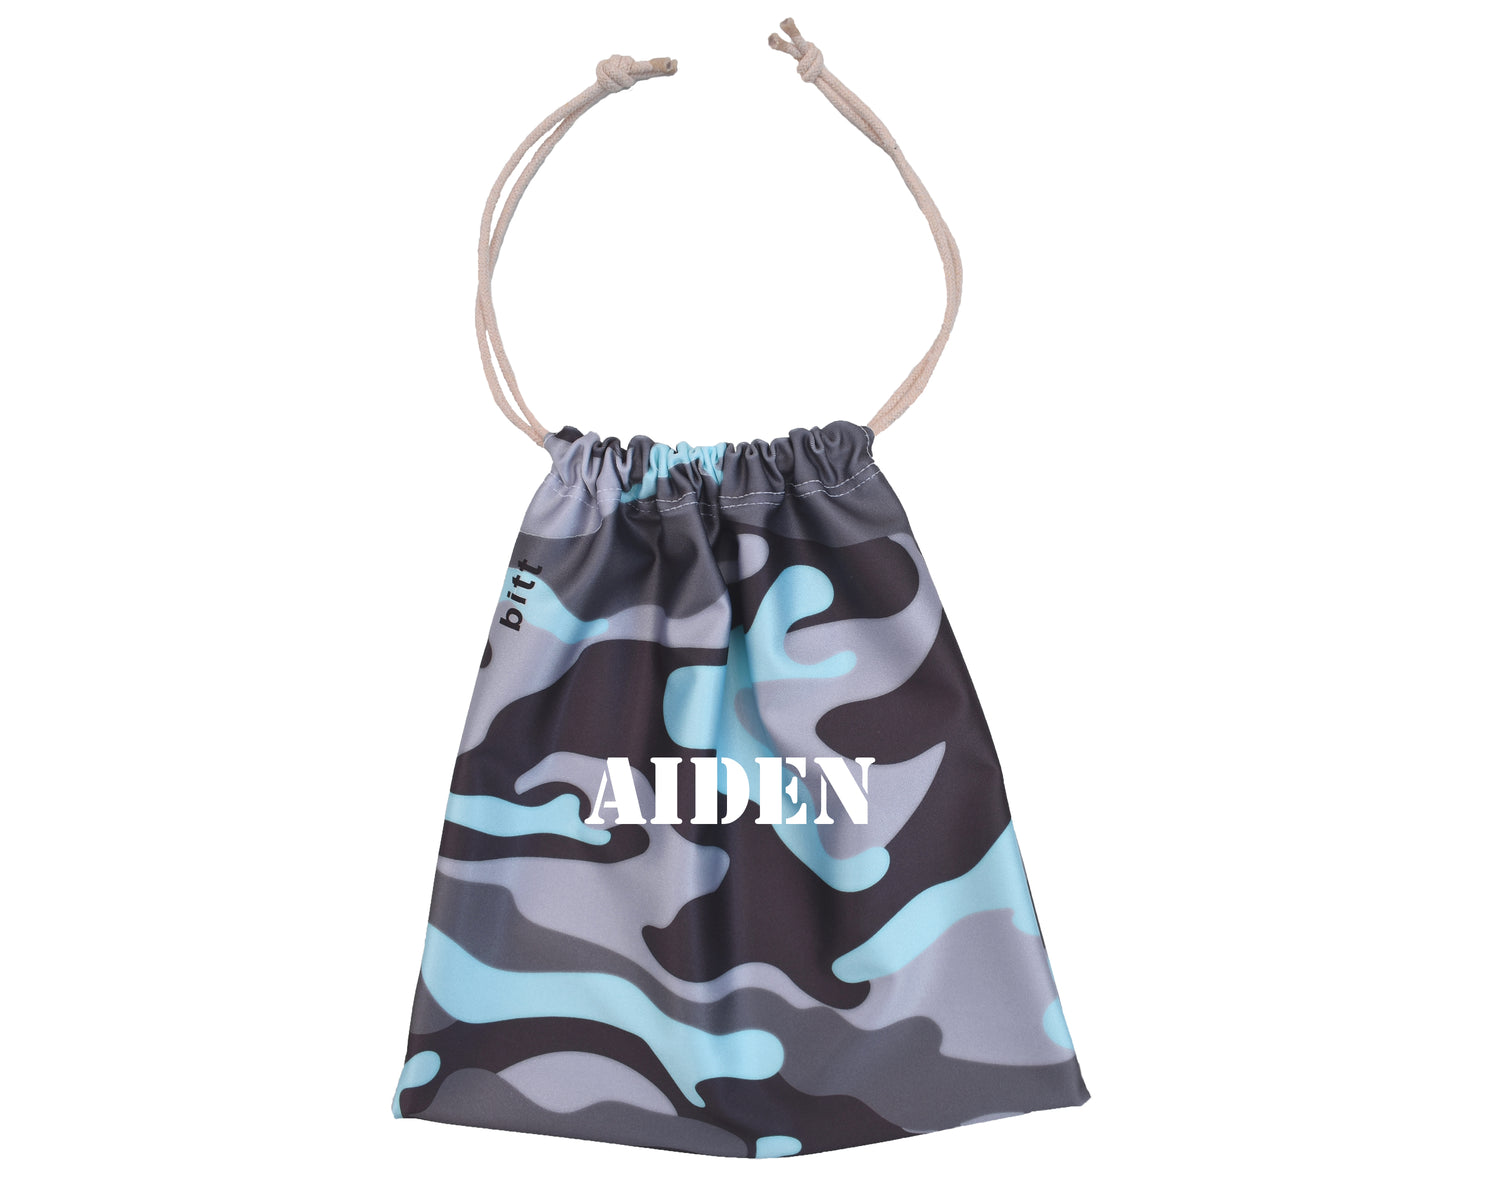 Personalized Gymnastics Grip Bag in Camouflage Seaglass with drawstrings